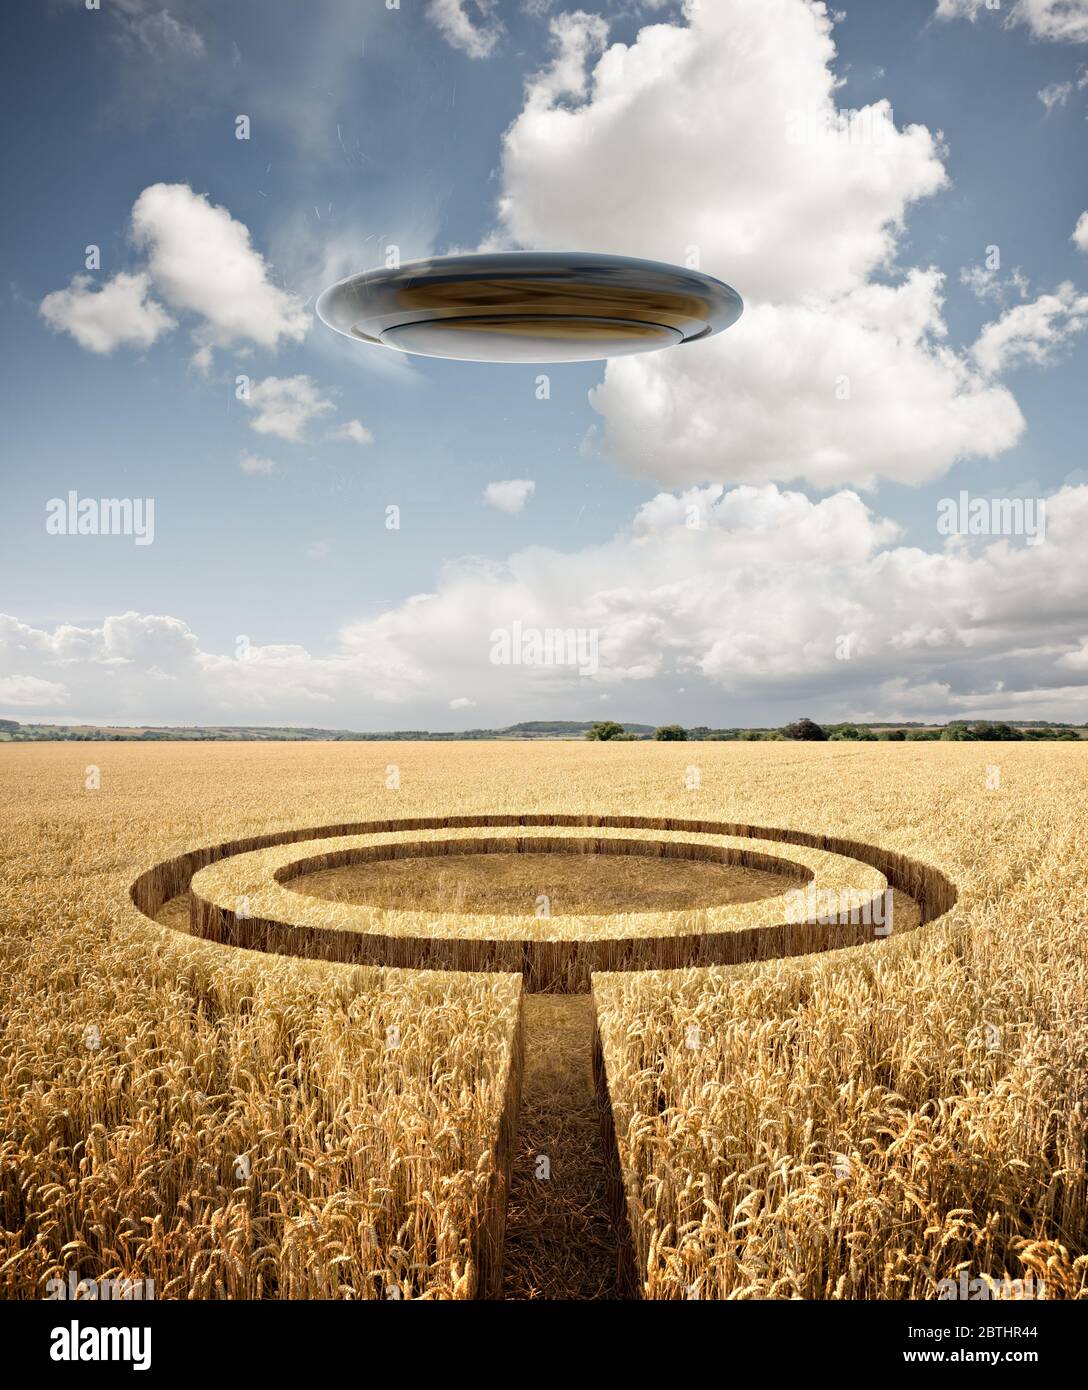 Stranger summer encounter. A UFO leaves crop circles in a wheat crop on a hot summers day. Mixed Media 3D Illustration. Stock Photo